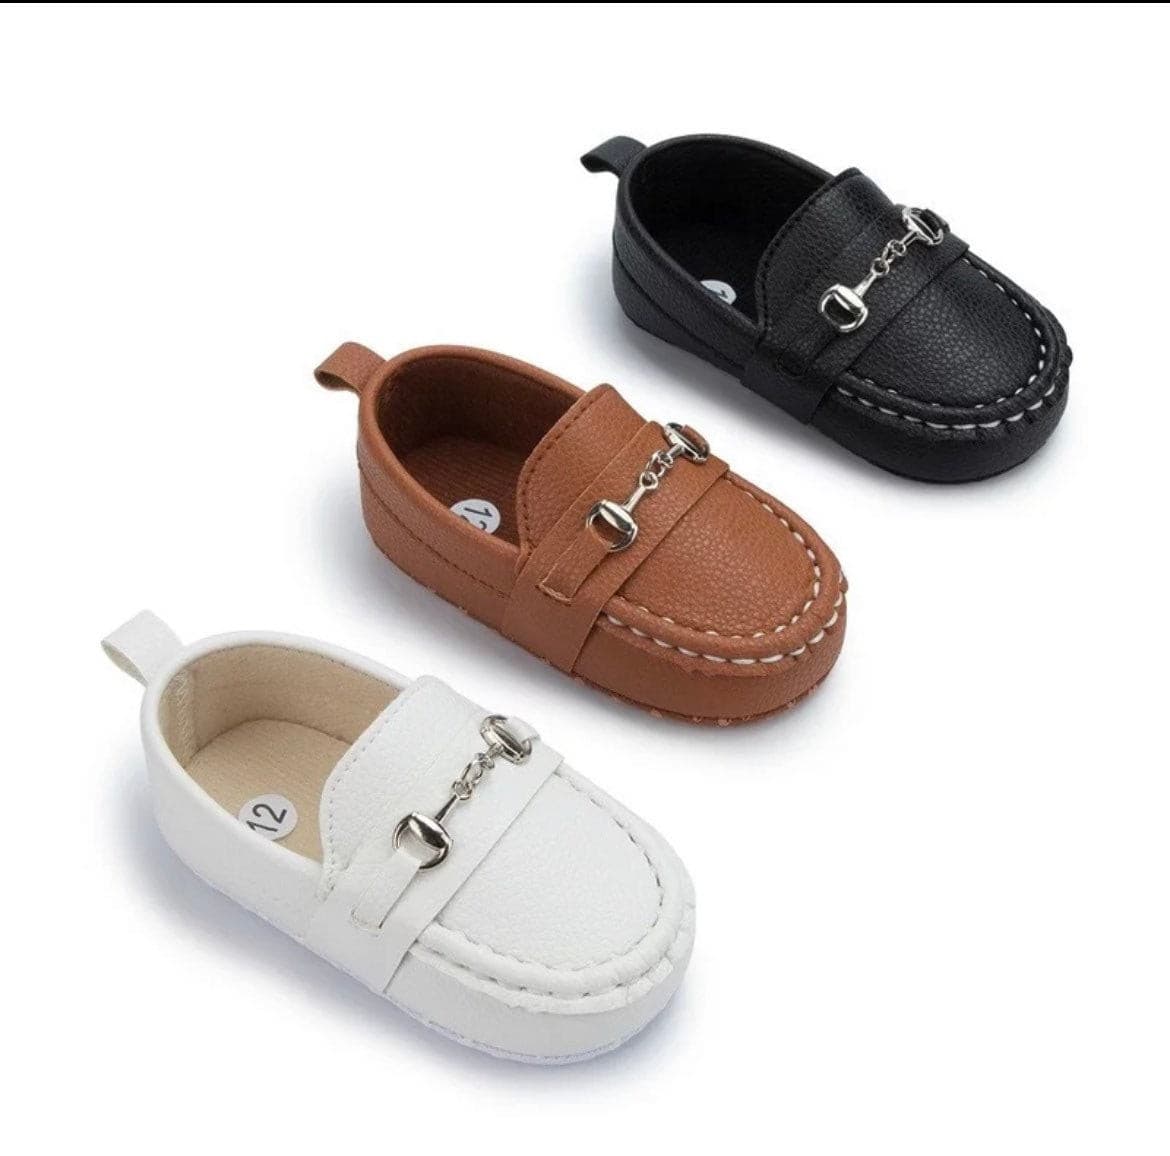 Quality Vegan Leather Baby Shoes, Baby boy shoes, Baby dress shoes, Wh-
 Welcome! Thanks for looking in our shop and viewing these beautiful handcrafted baby shoes.Our high quality first walker shoes are durable, breathable &amp; super -Bijou Bubs